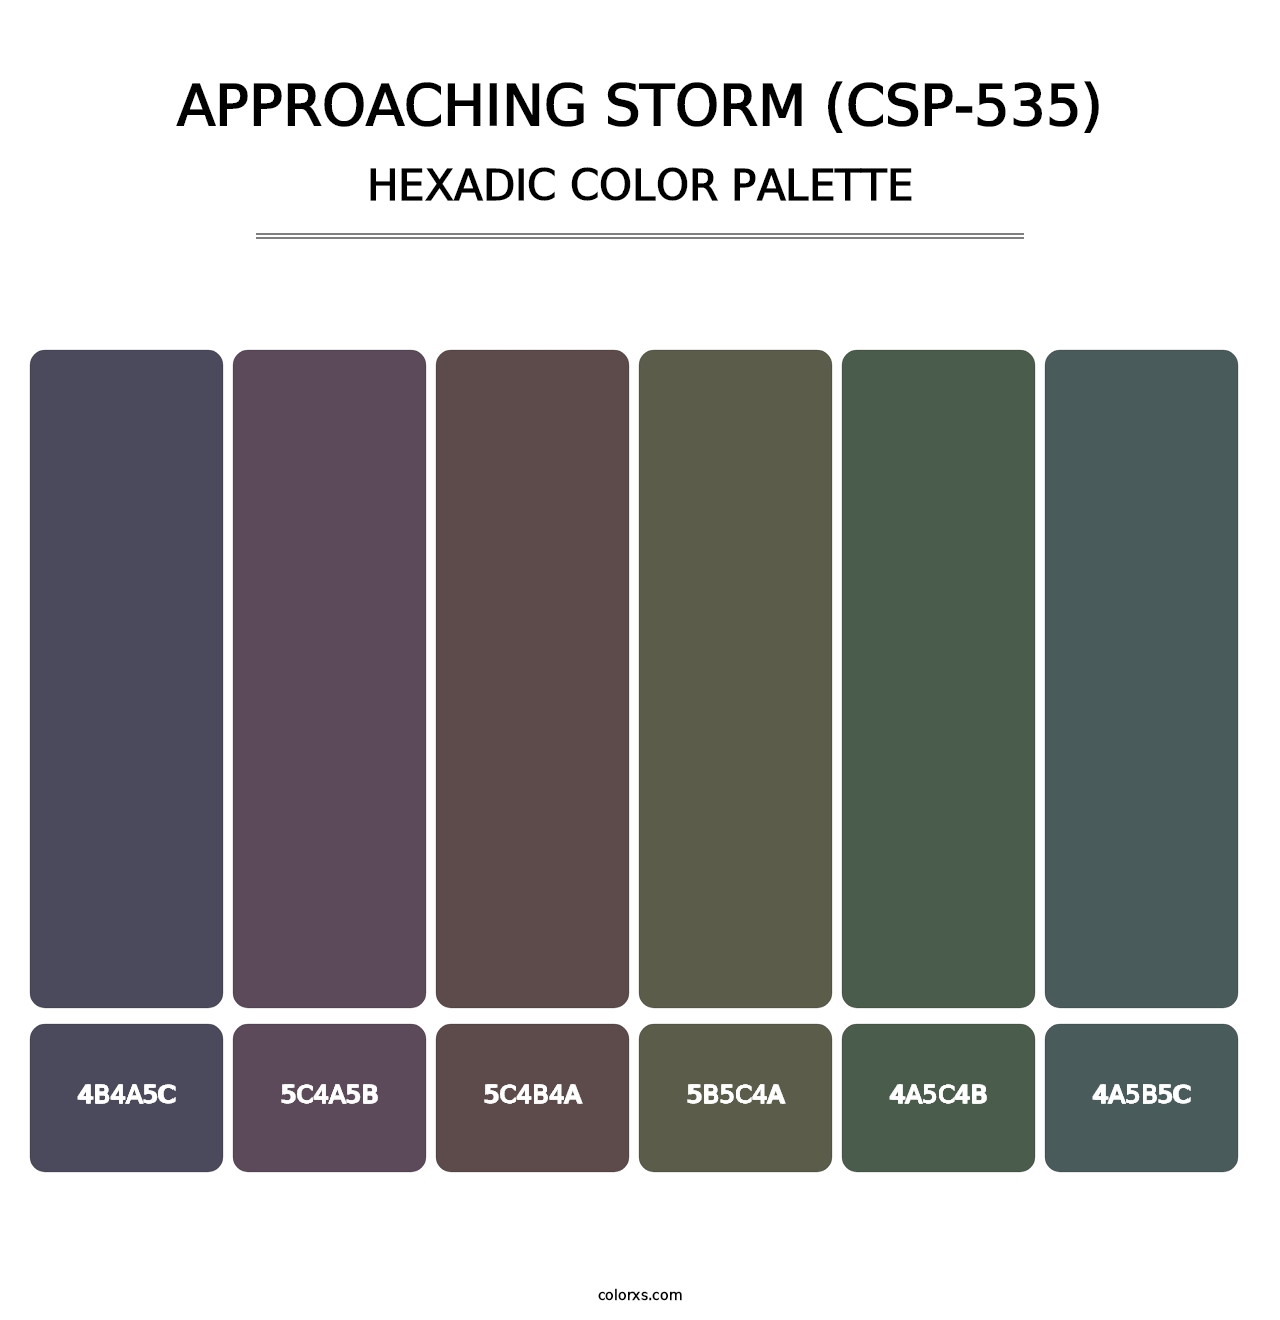 Approaching Storm (CSP-535) - Hexadic Color Palette